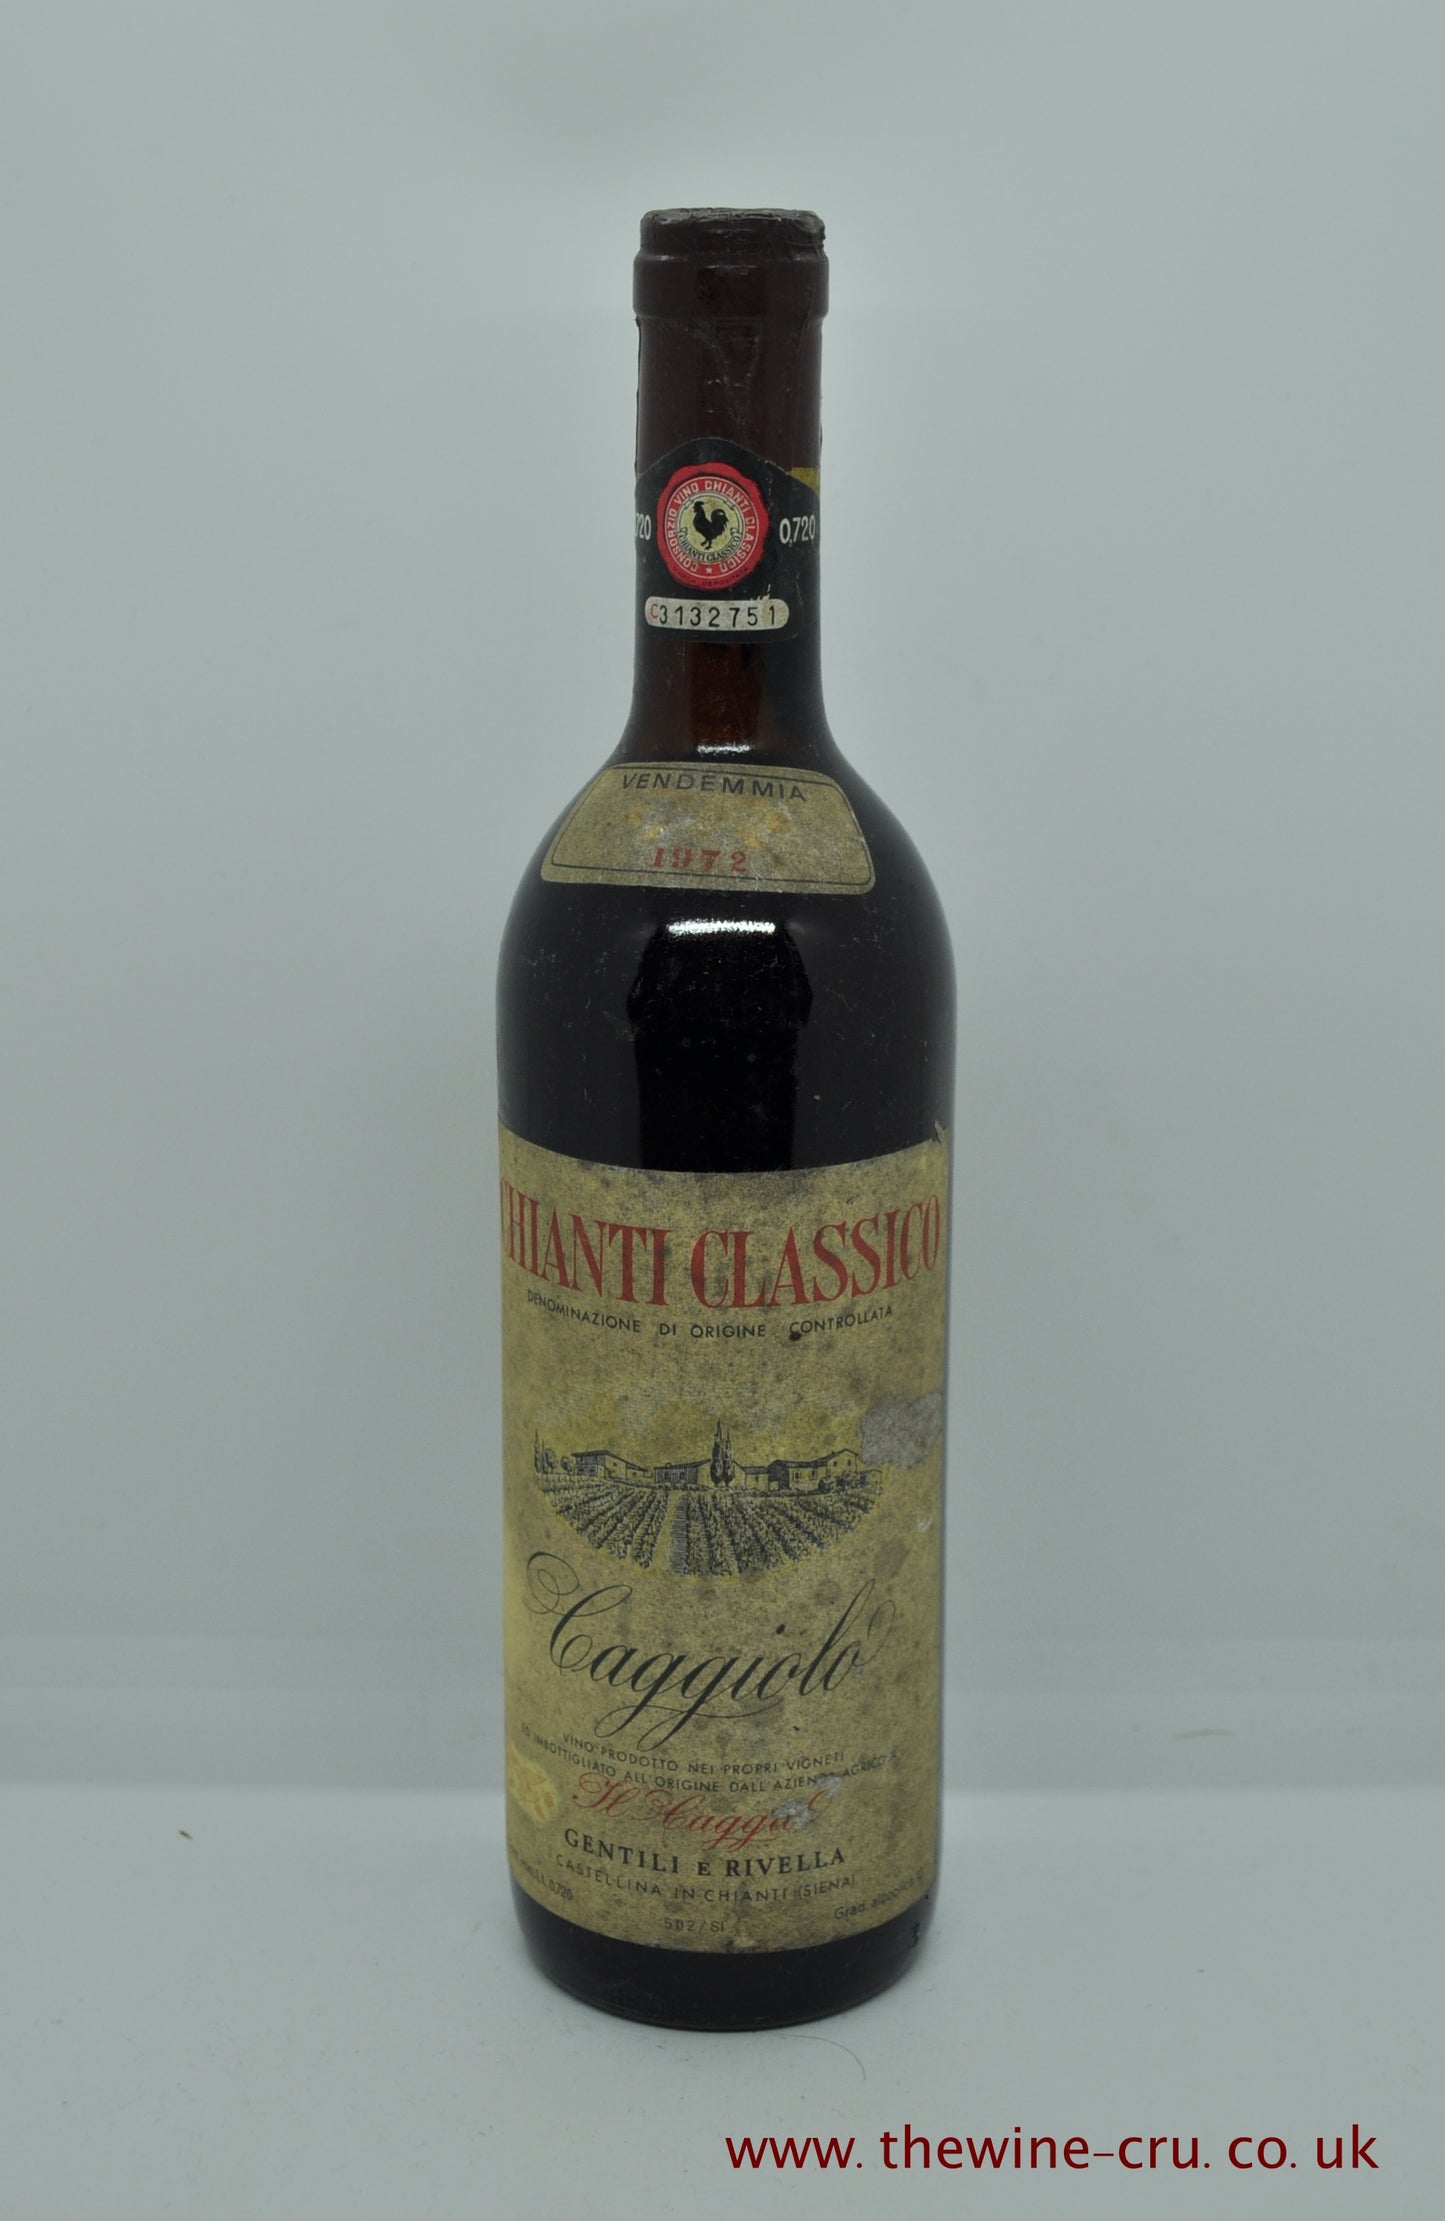 1972 vintage red wine. Chianti Classico Caggiolo Gentili E Rivella. The bottle is in good condition. The label is a little bin soiled and the wine level is very top shoulder. Immediate delivery. free local delivery. Gift wrapping available.